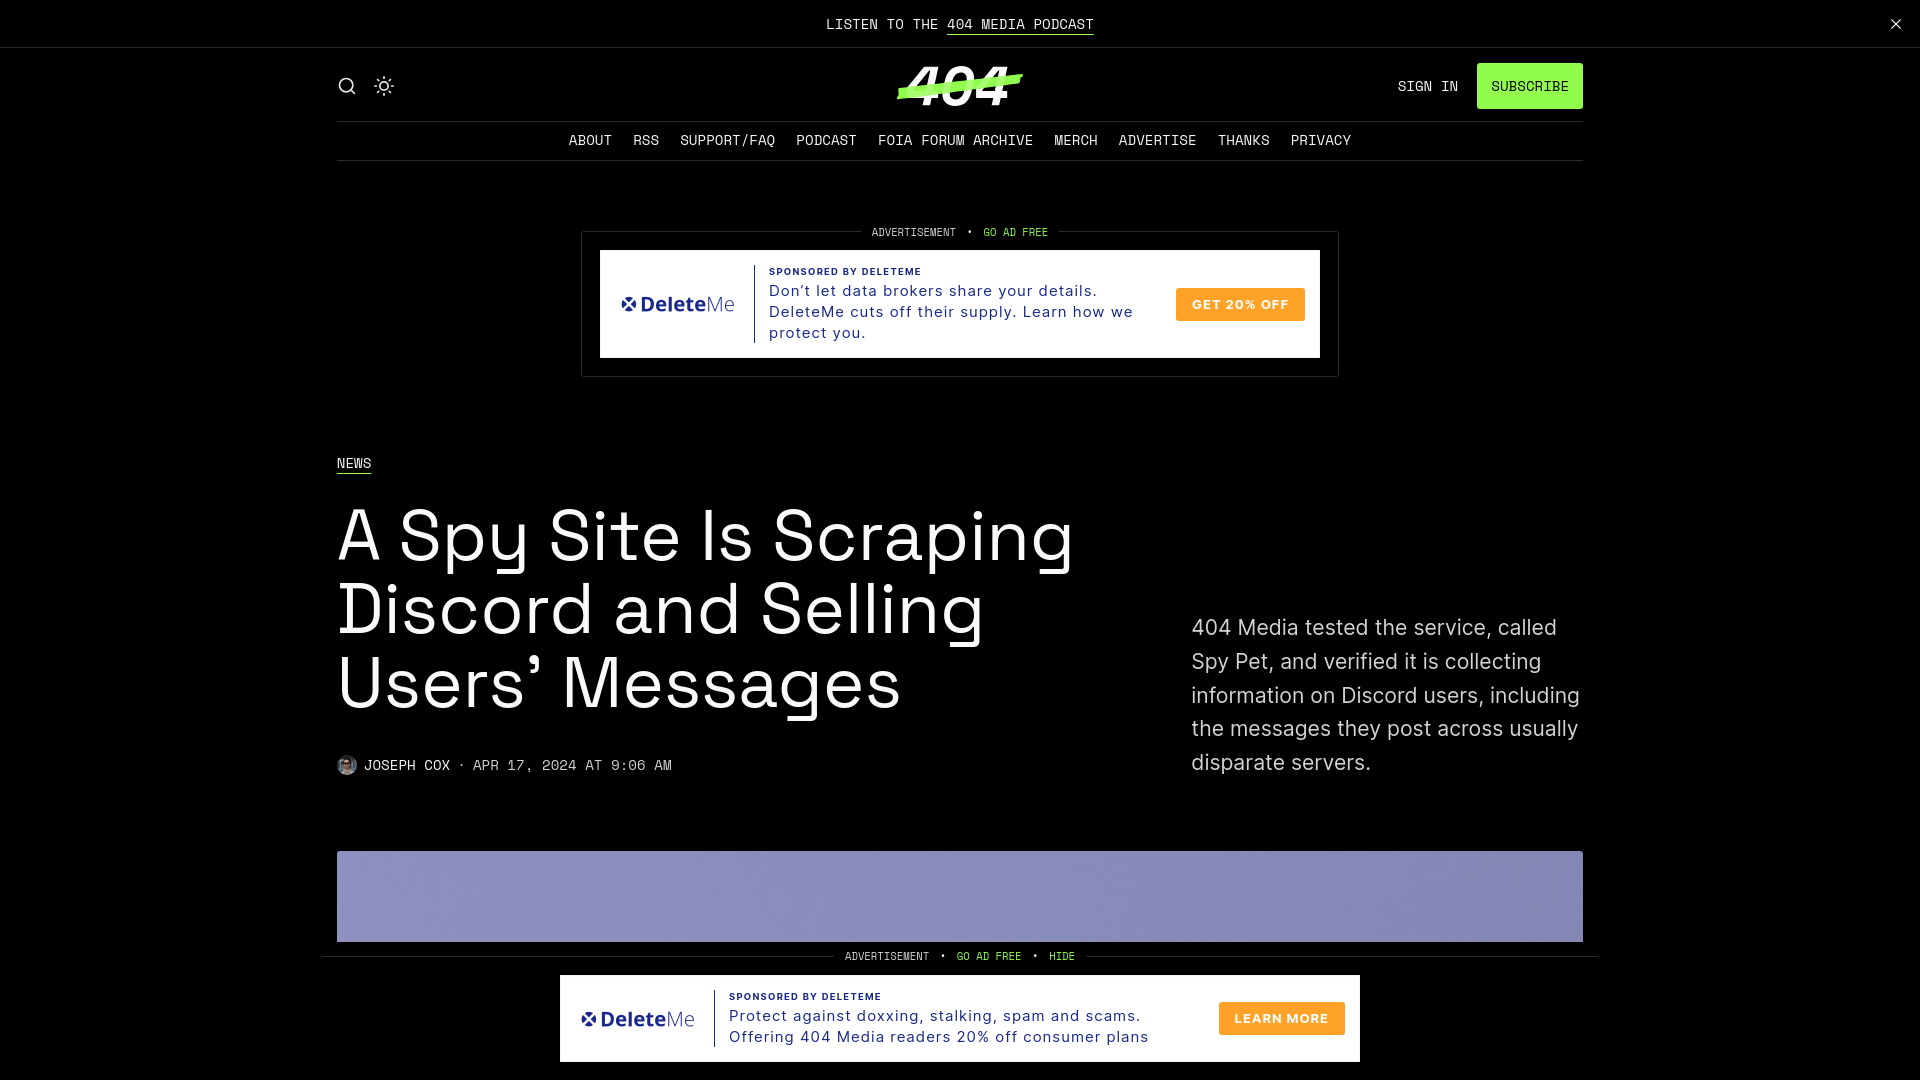 A Spy Site Is Scraping Discord and Selling Users’ Messages